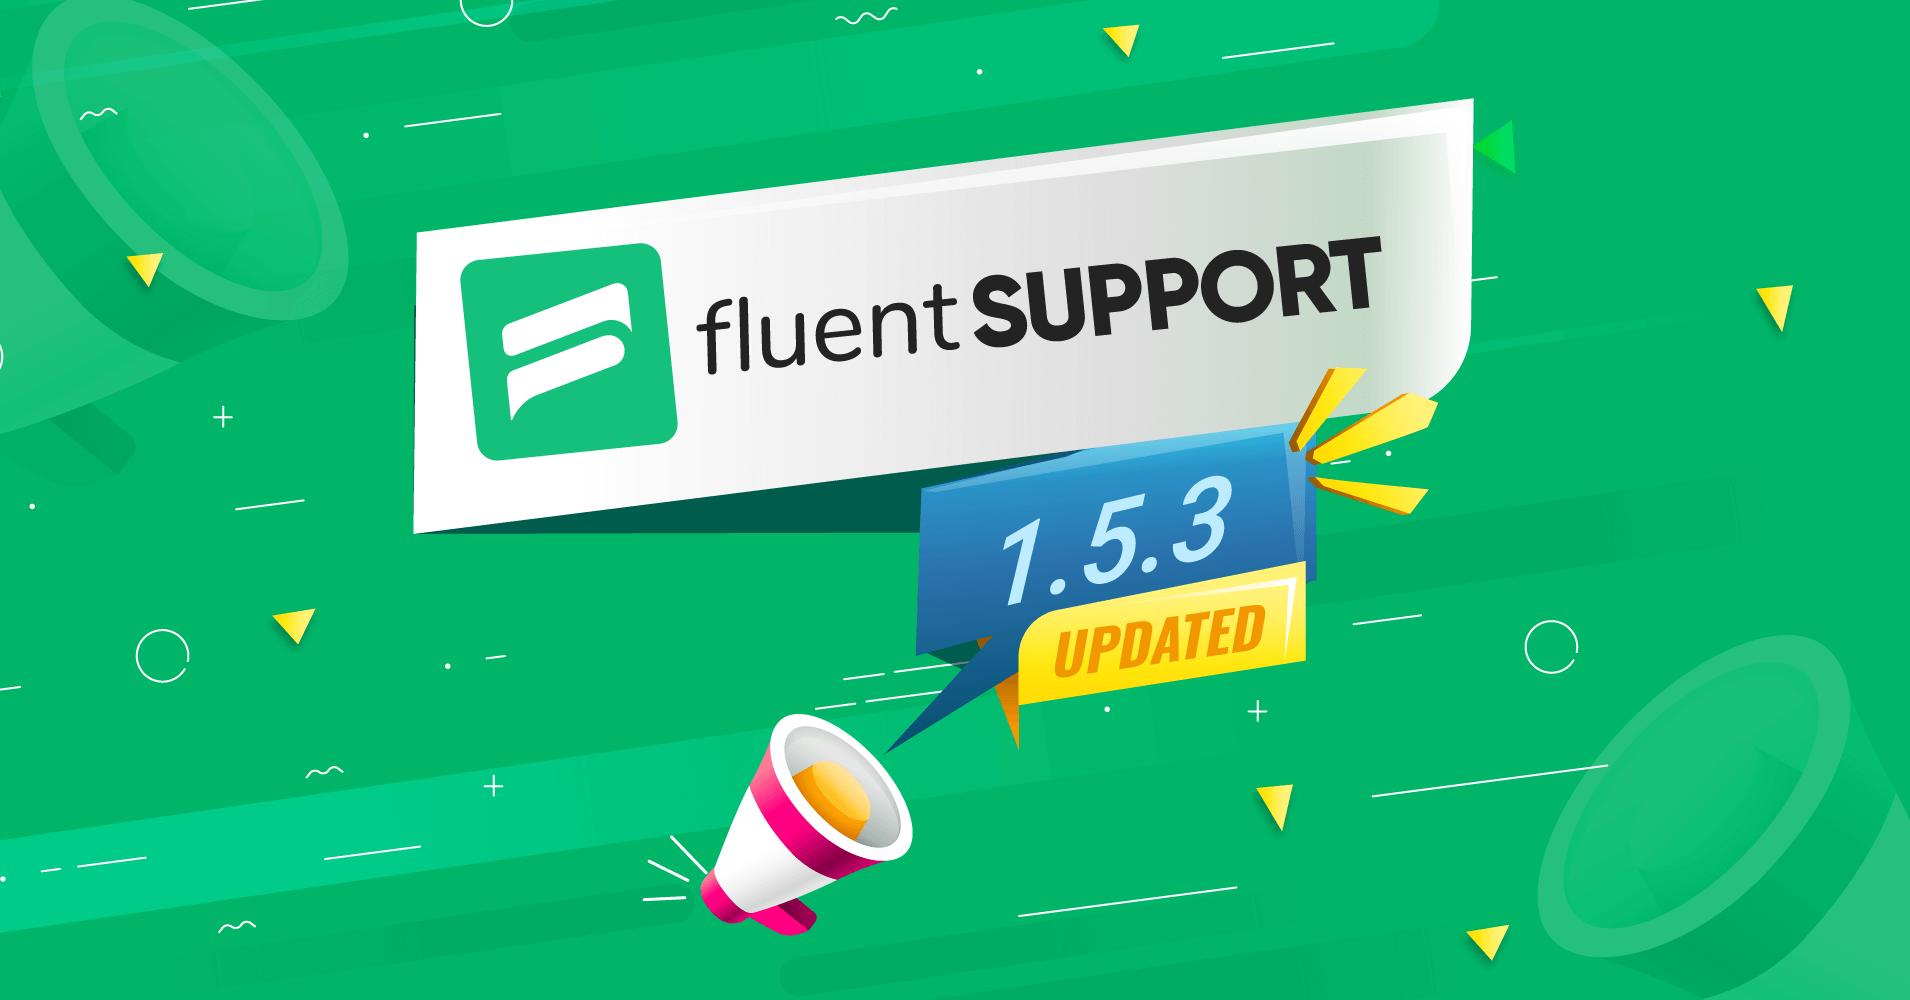 Fluent Support 1.5.3 Release Note: New Features and Improvements